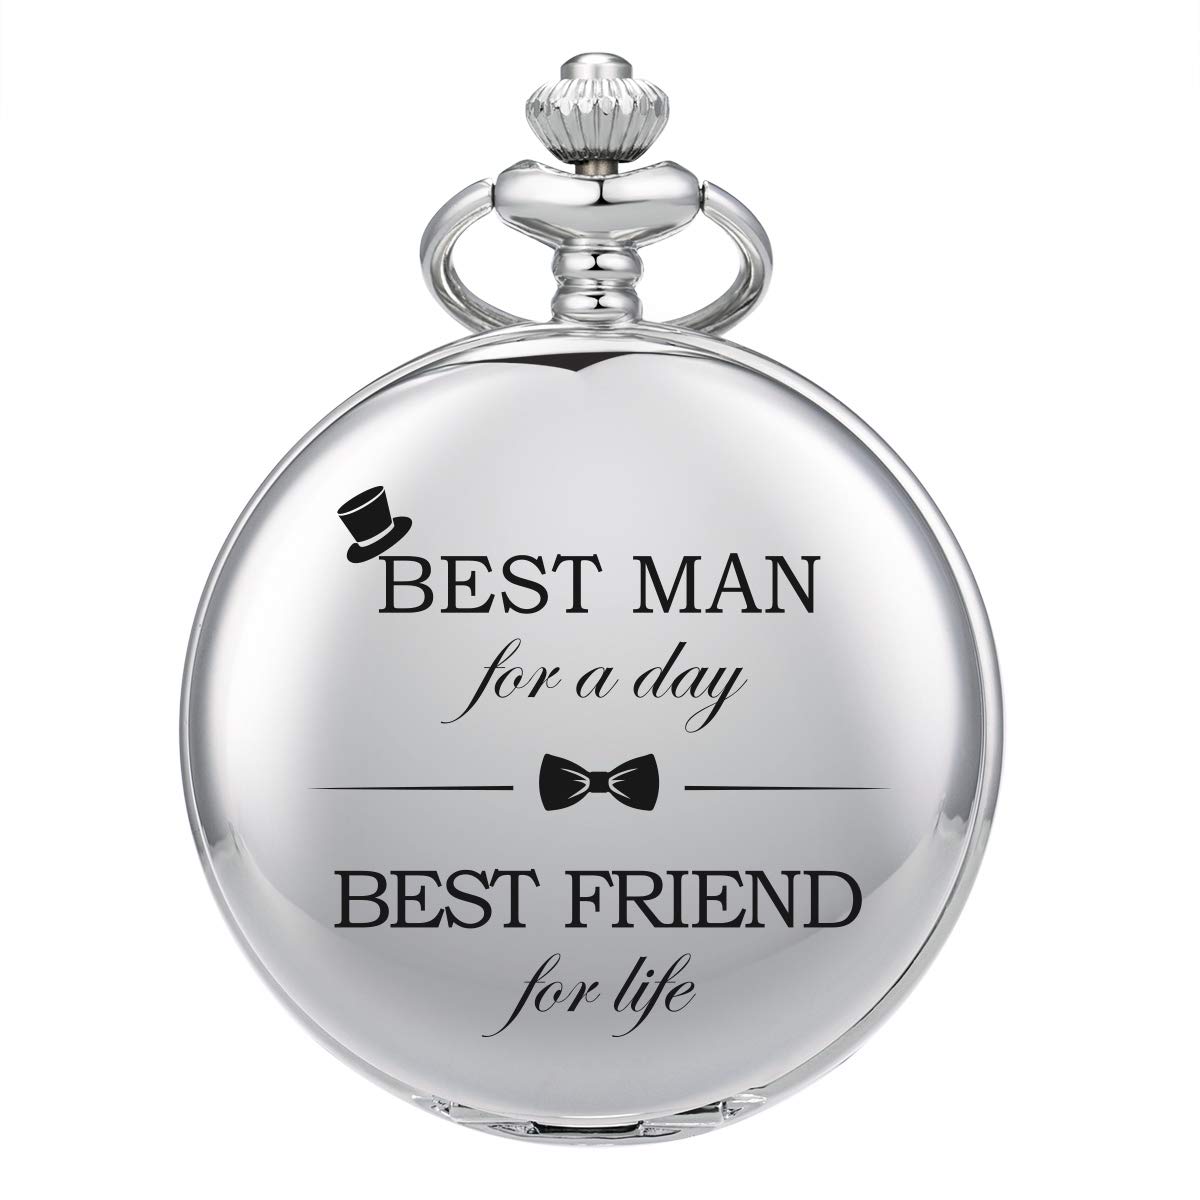 SIBOSUN Best Man for Wedding or Proposal - Engraved Best Men Pocket Watch Couple Watch with Luxury Rose Gift Box His and Hers Watch Valentine's Romantic Men and Women Wrist Watches